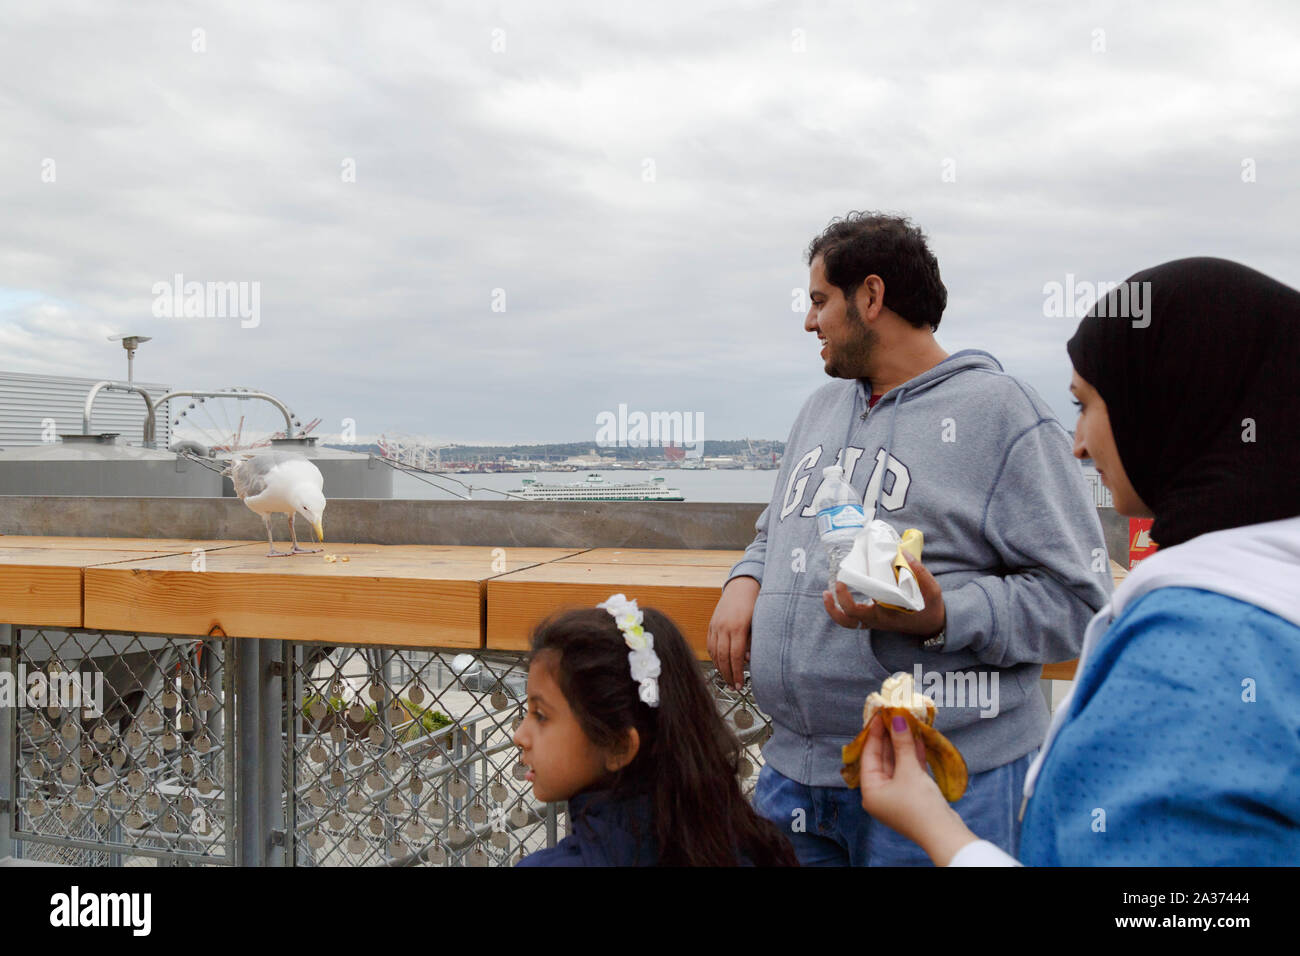 A family interacts with a wild seagull by feeding their food at the Pike Place Market observation deck overlooking Puget Sound in Seattle,USA. Stock Photo